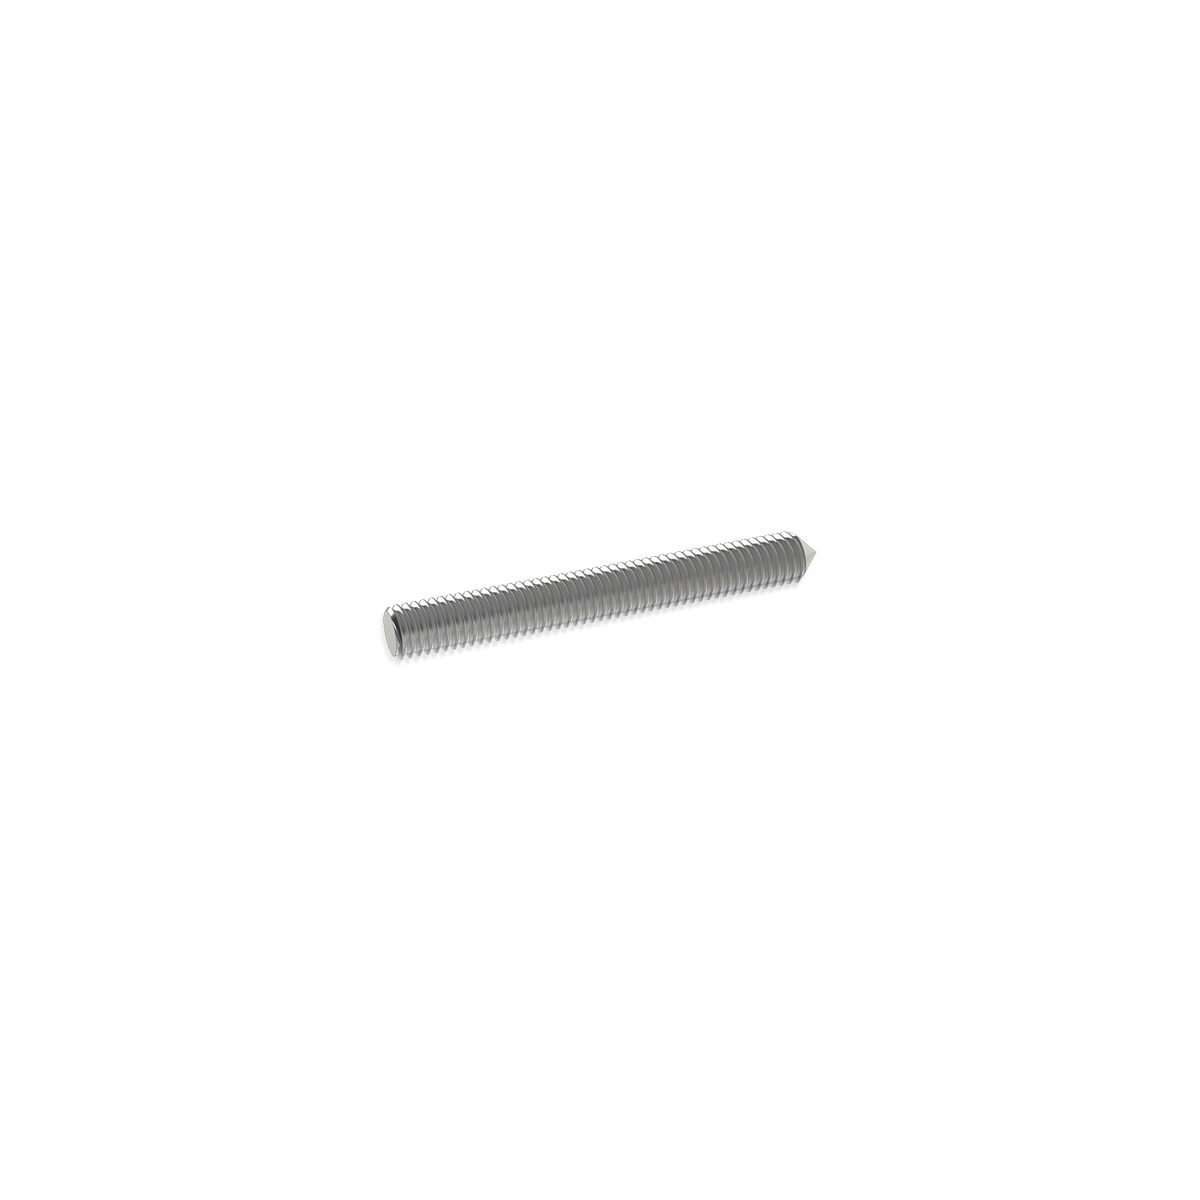 1/4'' Diameter X 2'' Long, Stainless Steel 1/4-20 Threaded Stud (1 End Flat - 1 End Conical)